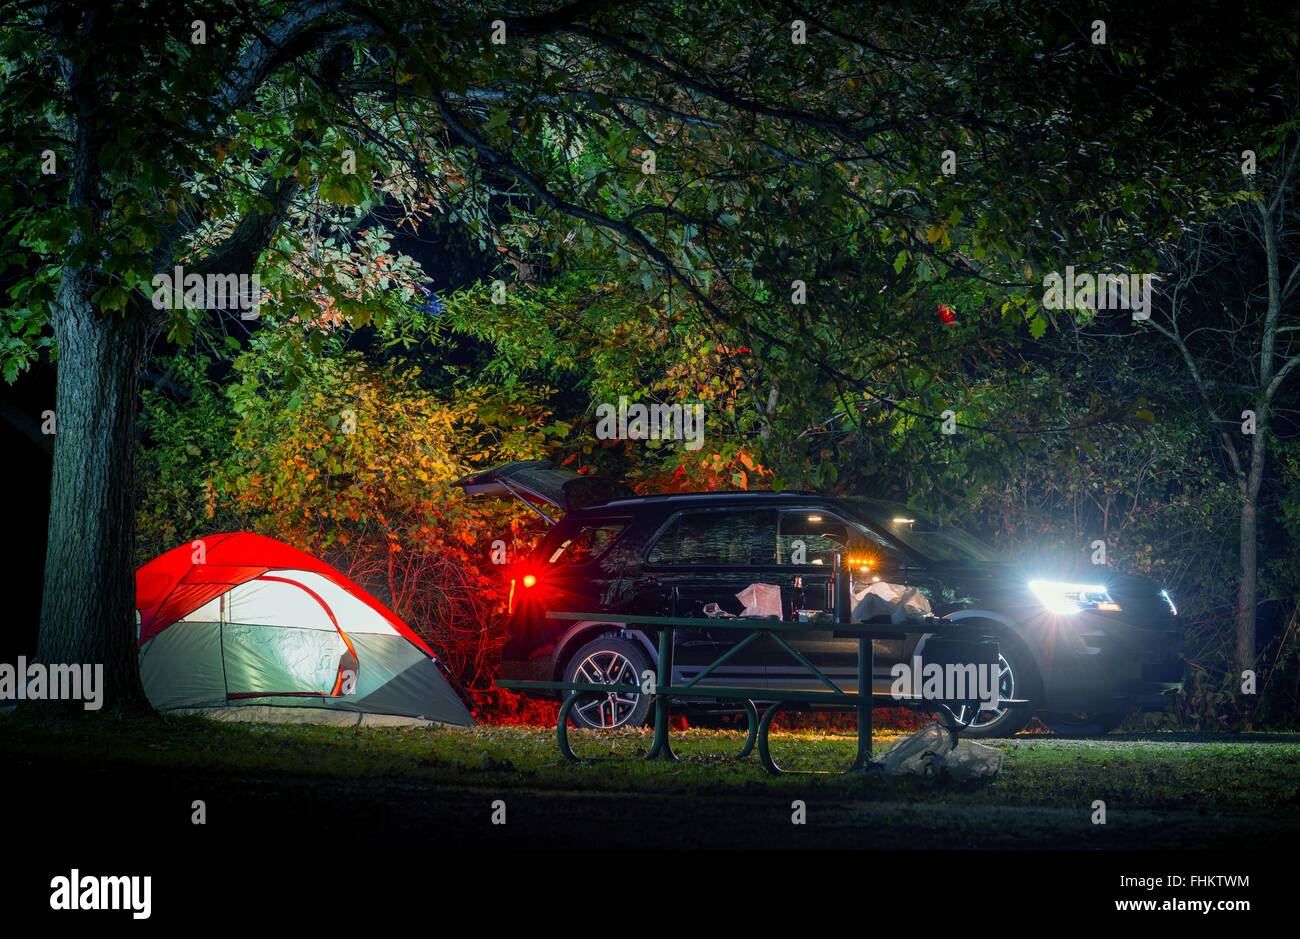 Summer Overnight Tent Camping. Modern Sport Utility Vehicle and Illuminated Small Double Tent Under Old Tree. Campsite on Camp Stock Photo